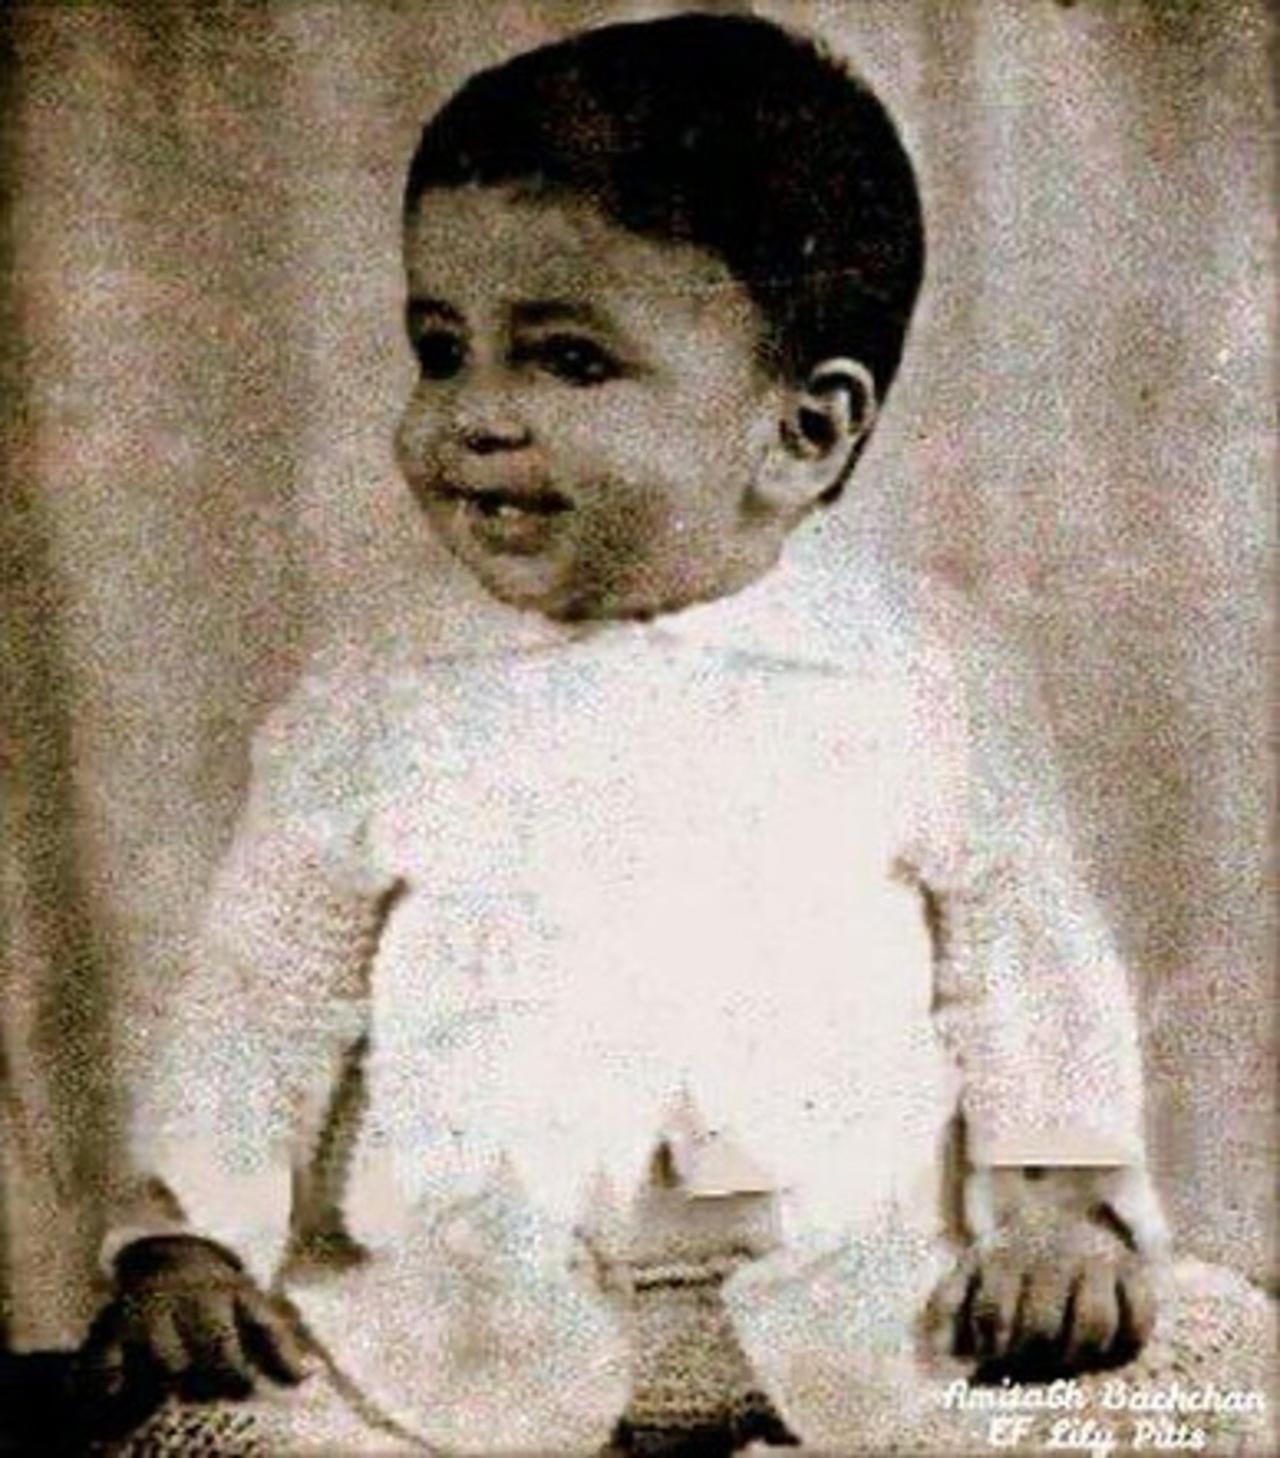 It's so hard to imagine that deep baritoned Sr. Bachchan was a small baby once!